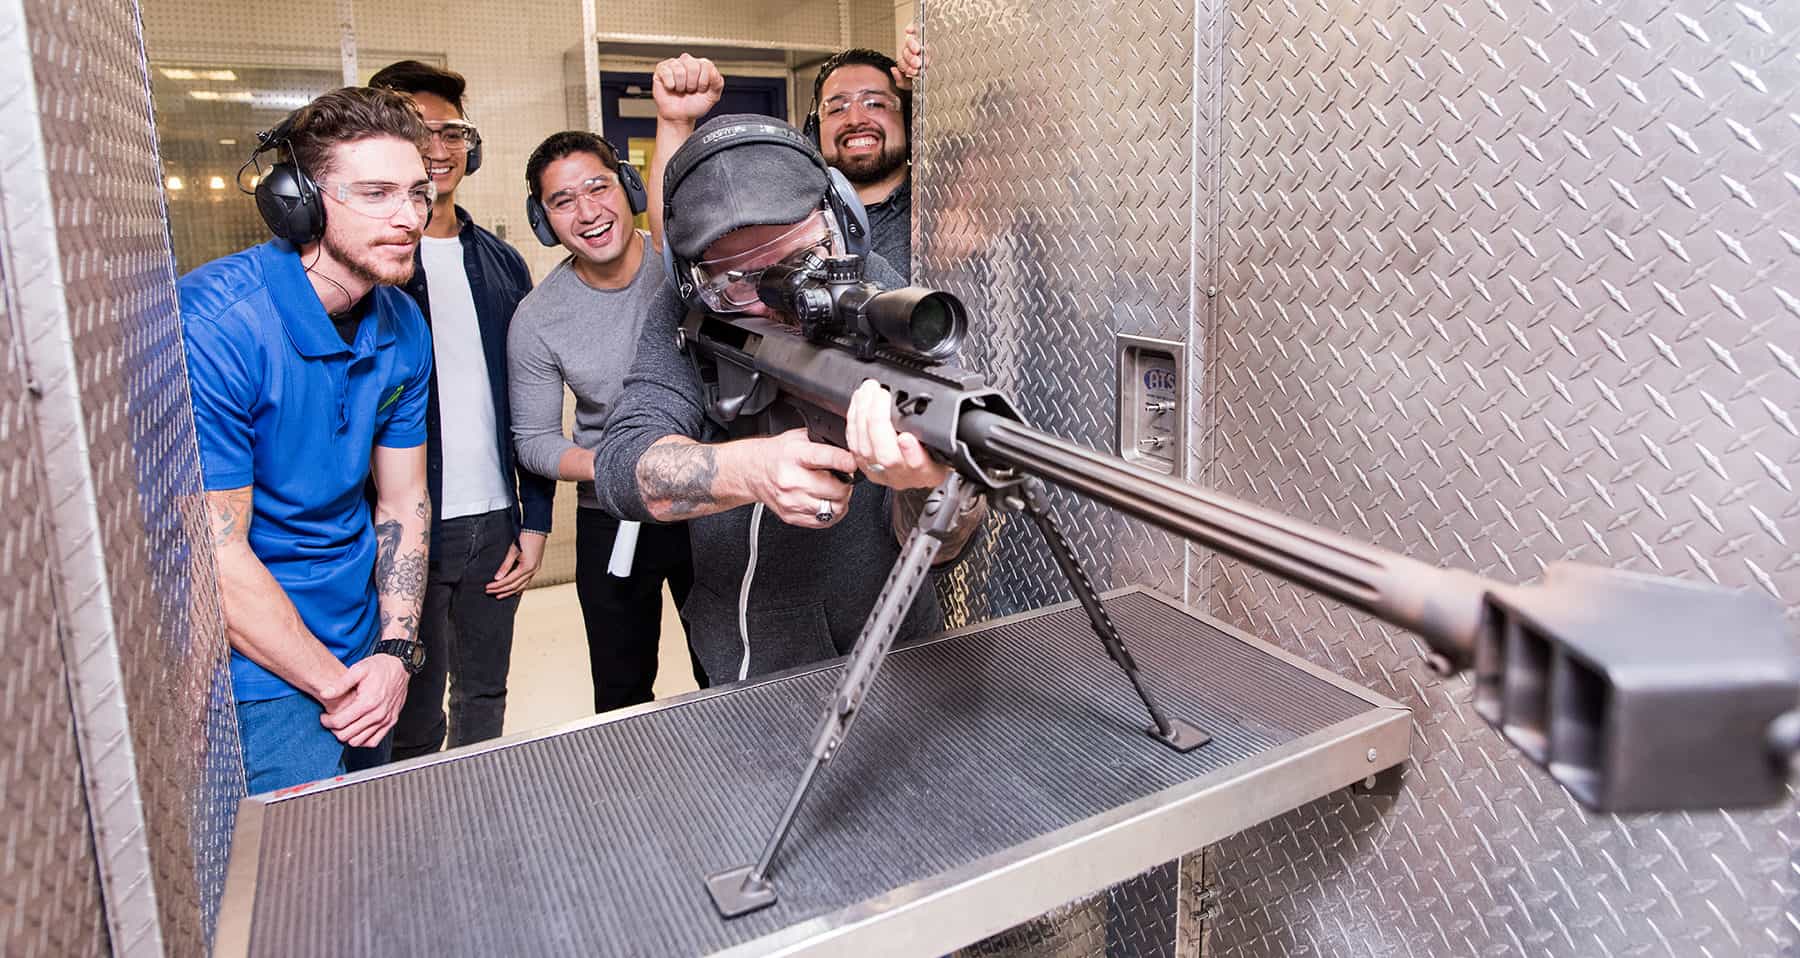 An instructor with 4 men shooting a gun at The Range 702.